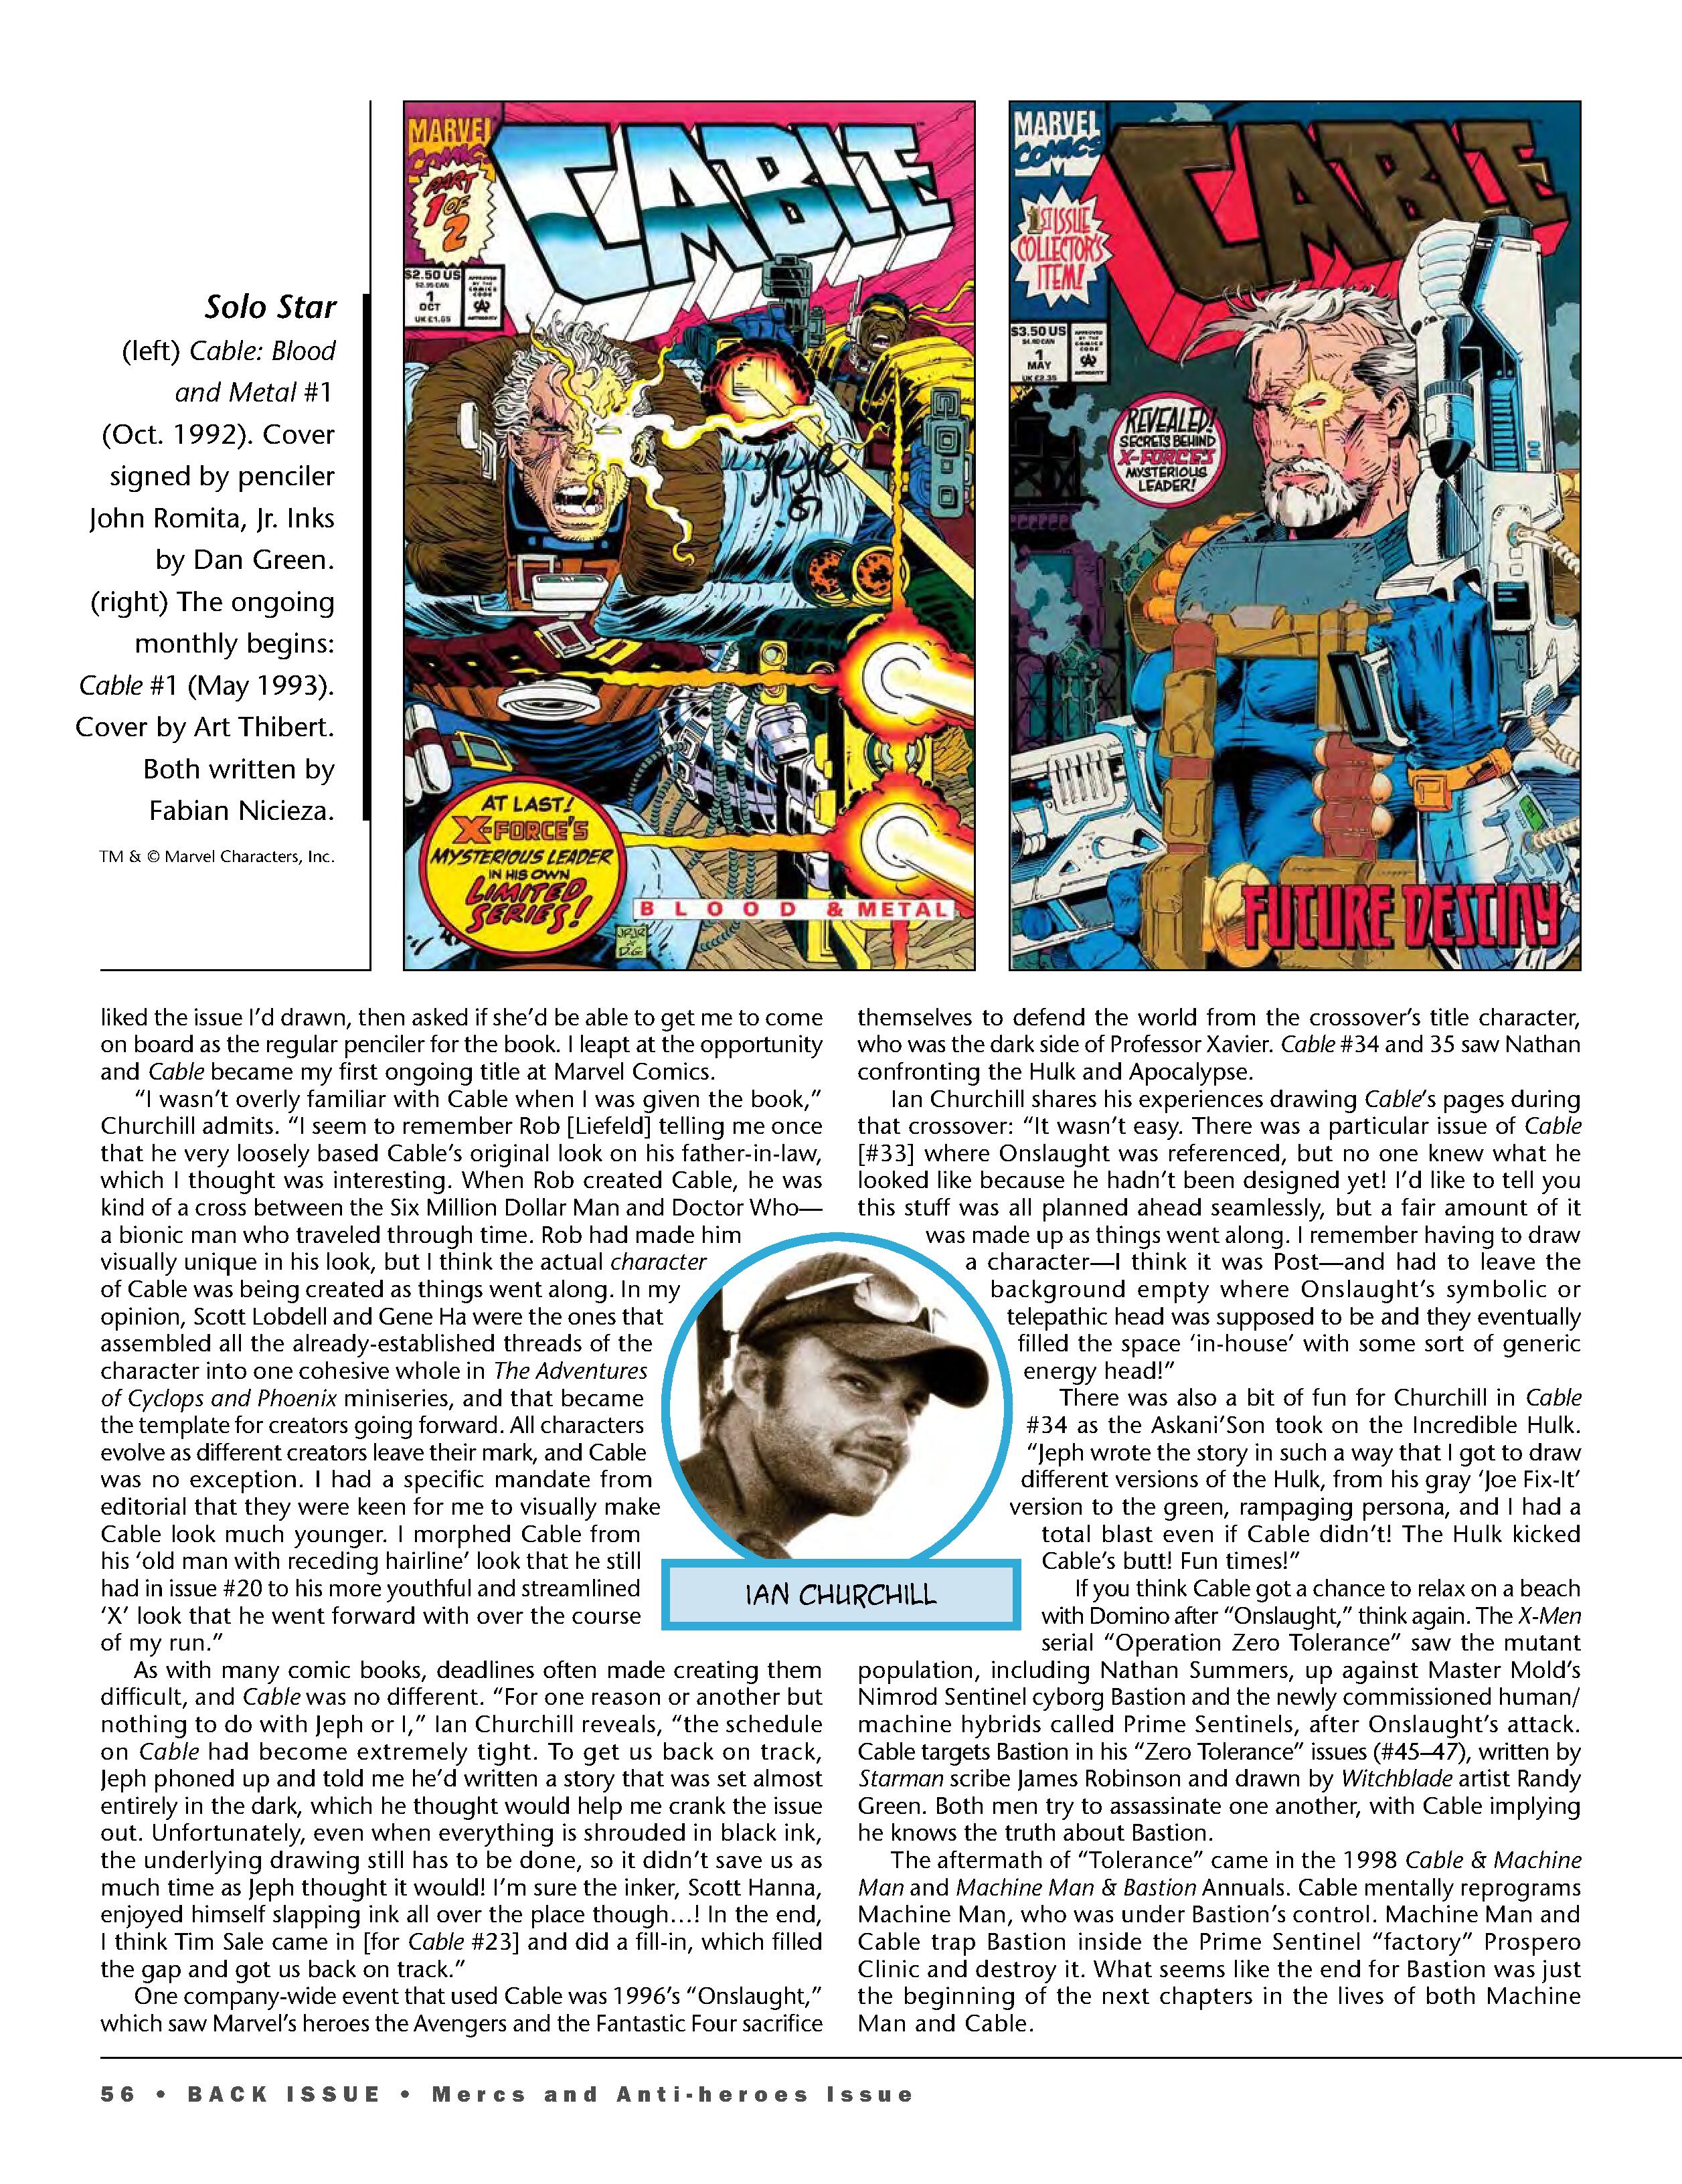 Read online Back Issue comic -  Issue #102 - 58